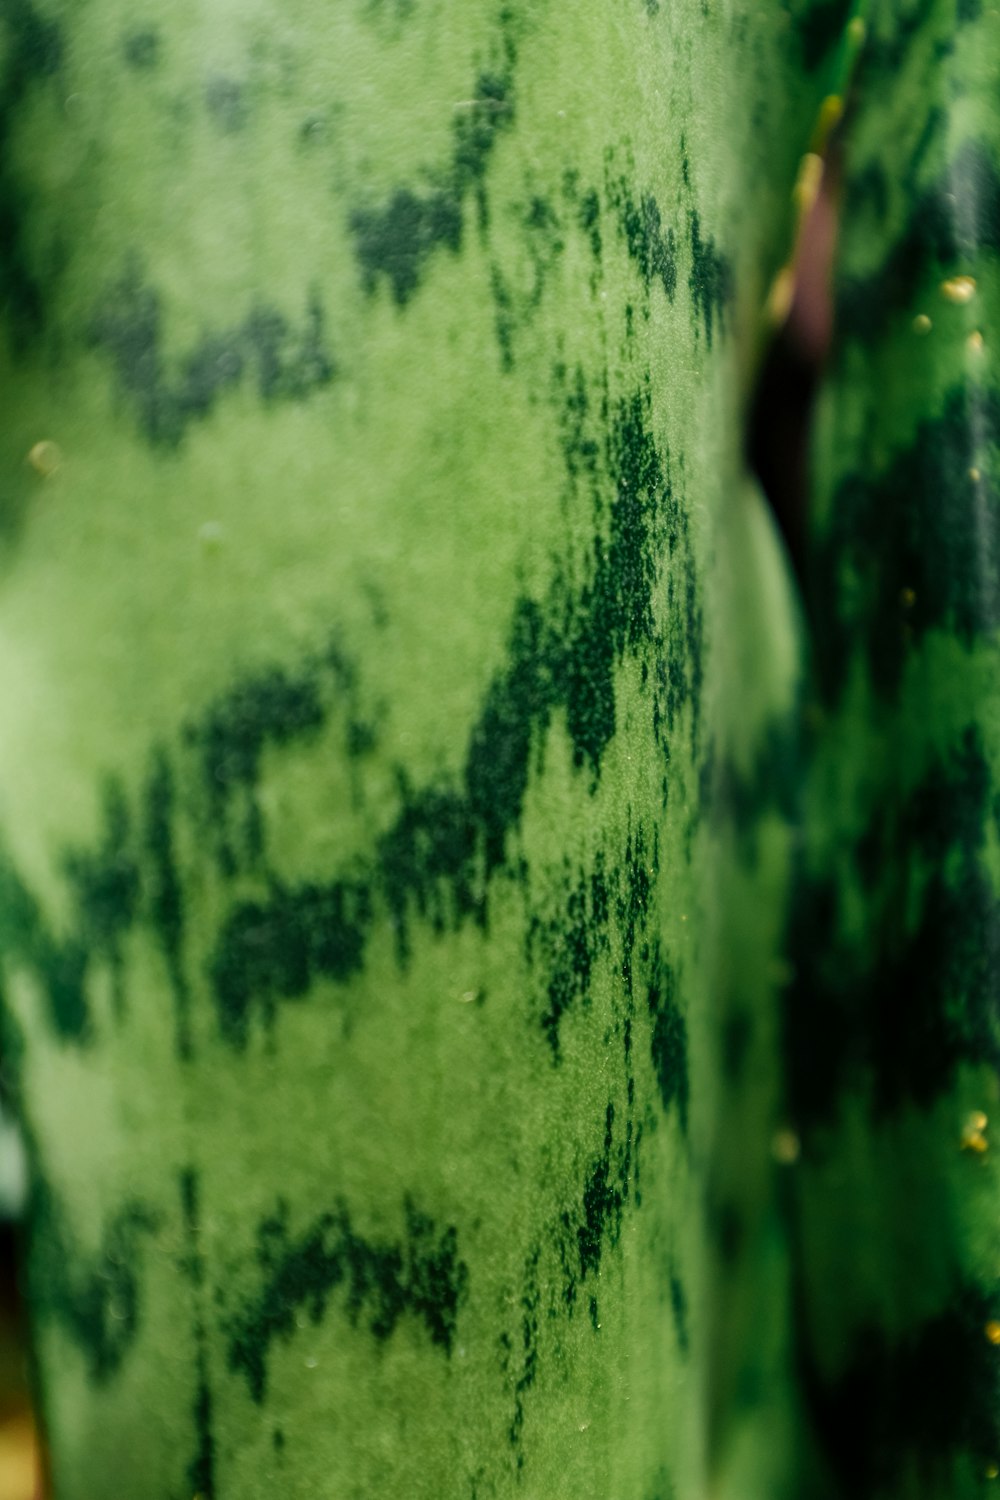 a close up view of a green vase